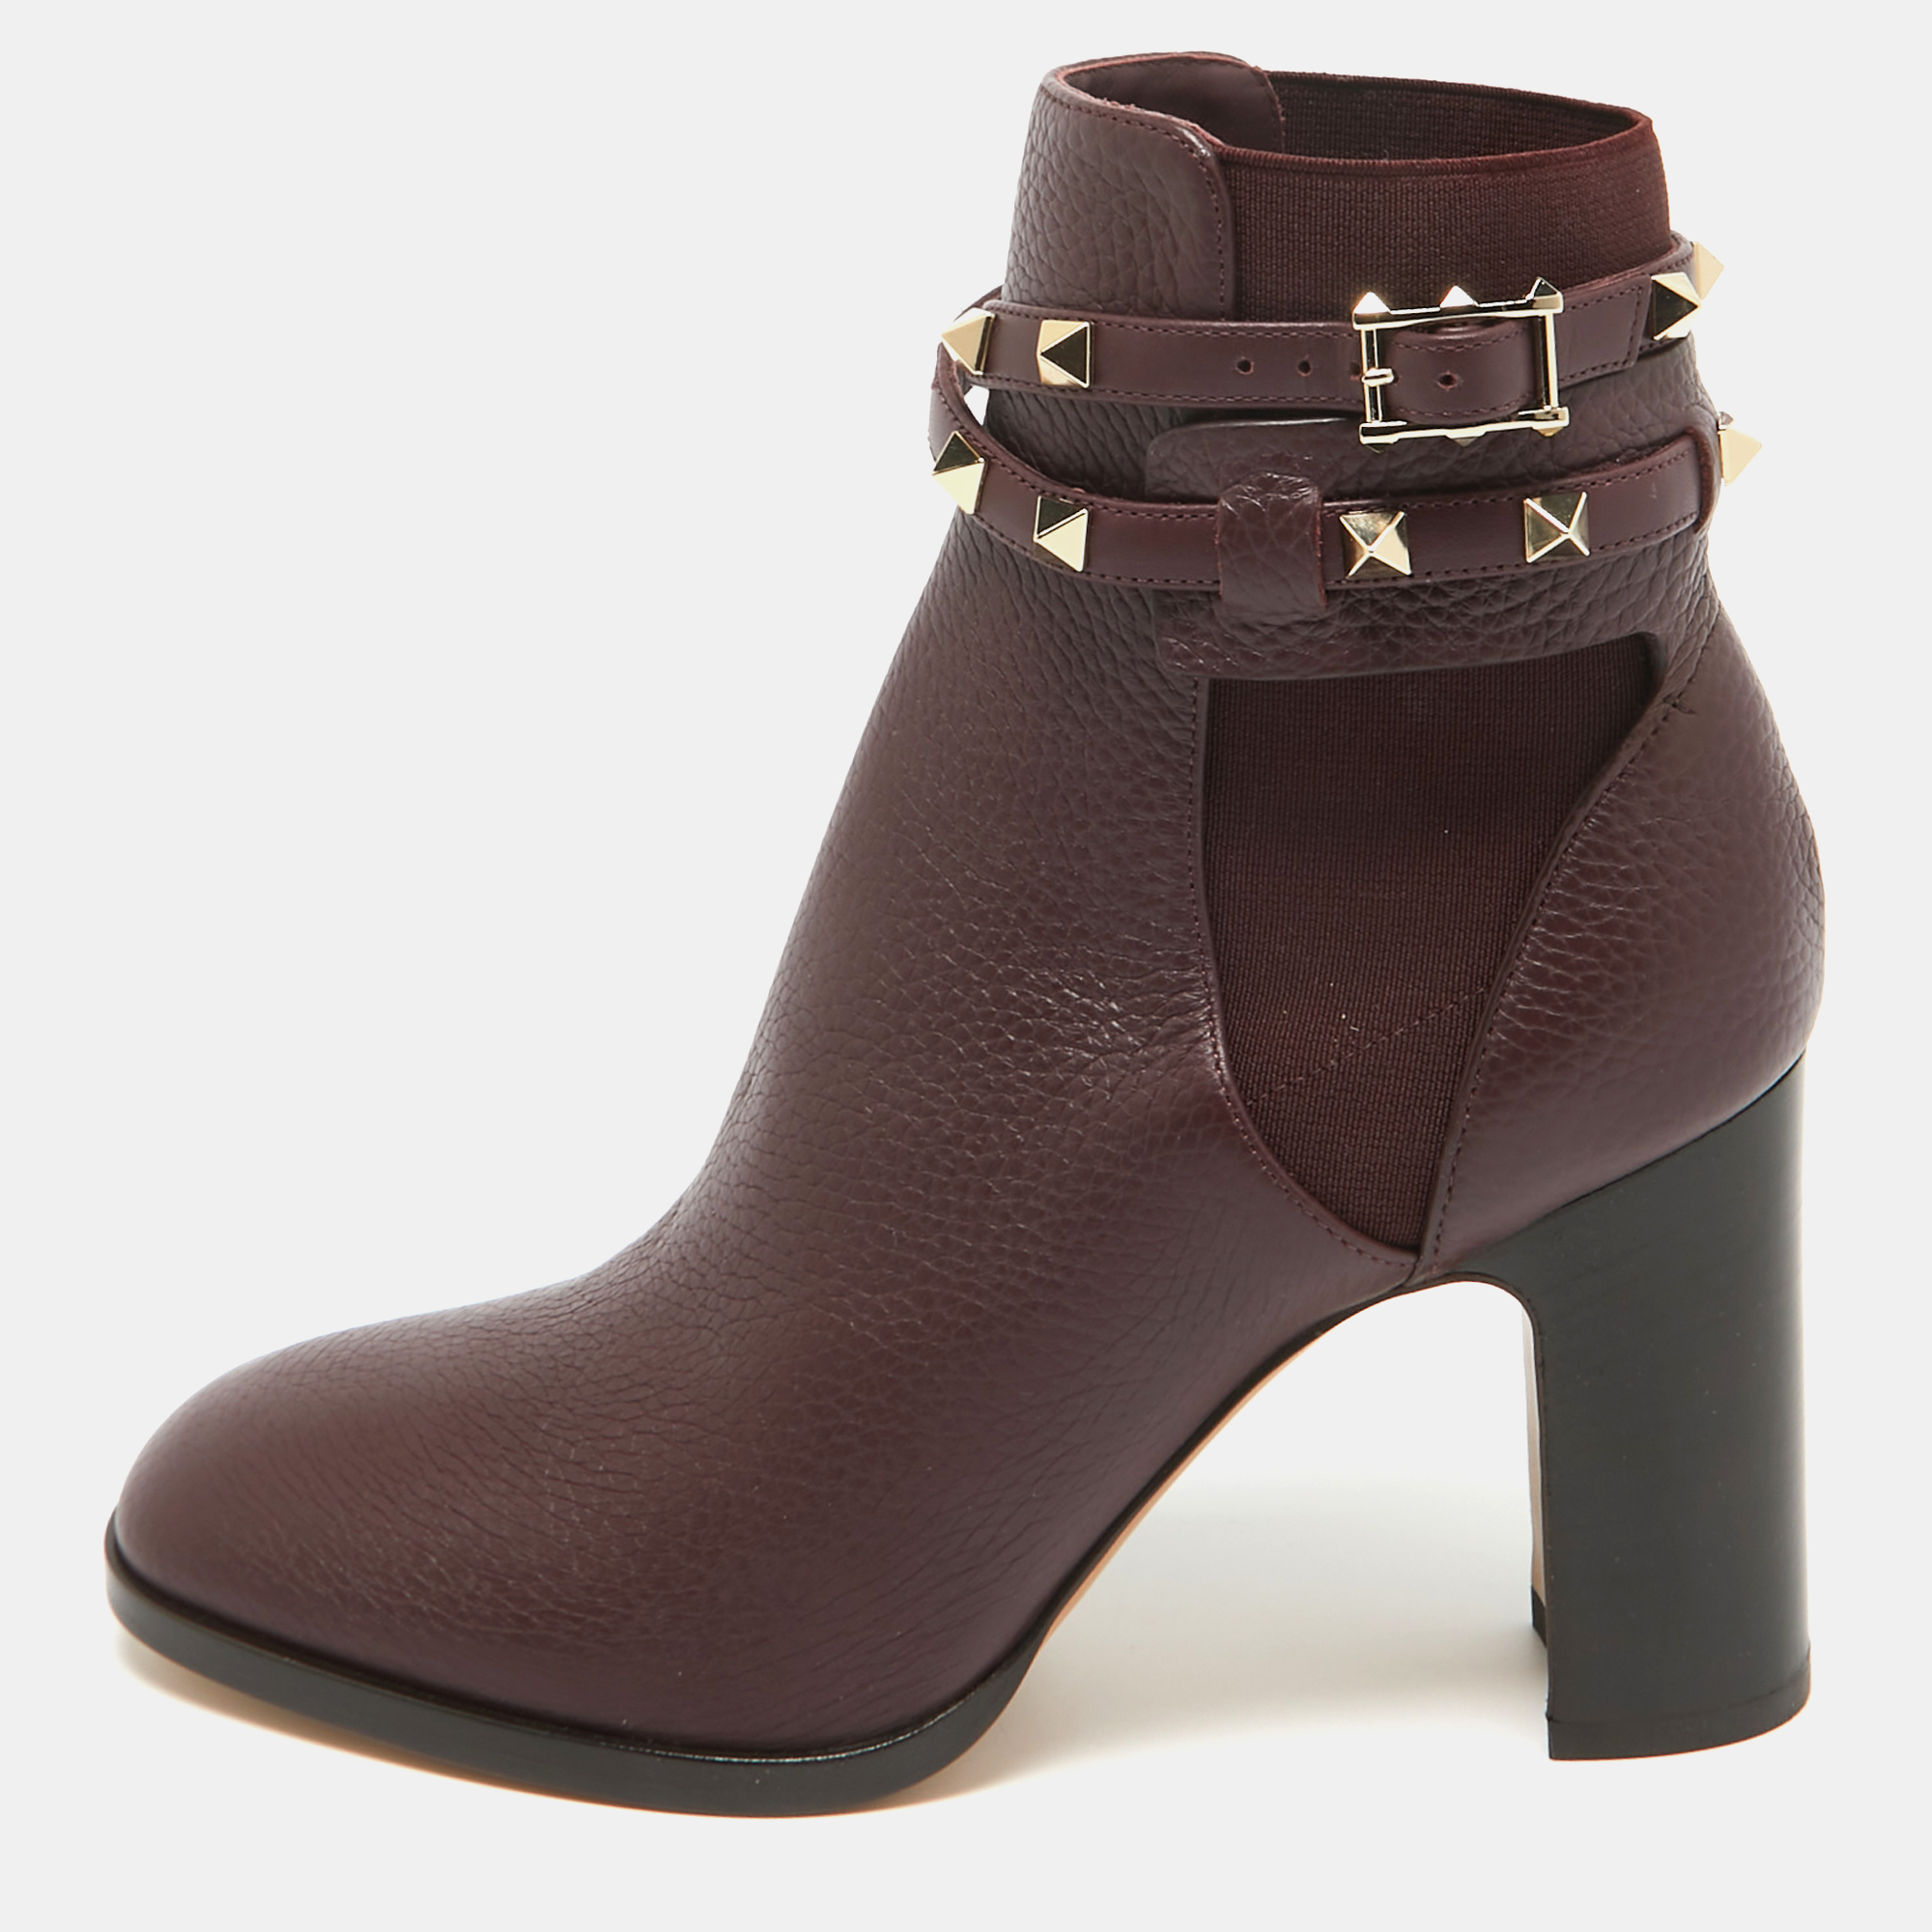 Valentino burgundy leather rockstud ankle boots size 37.5